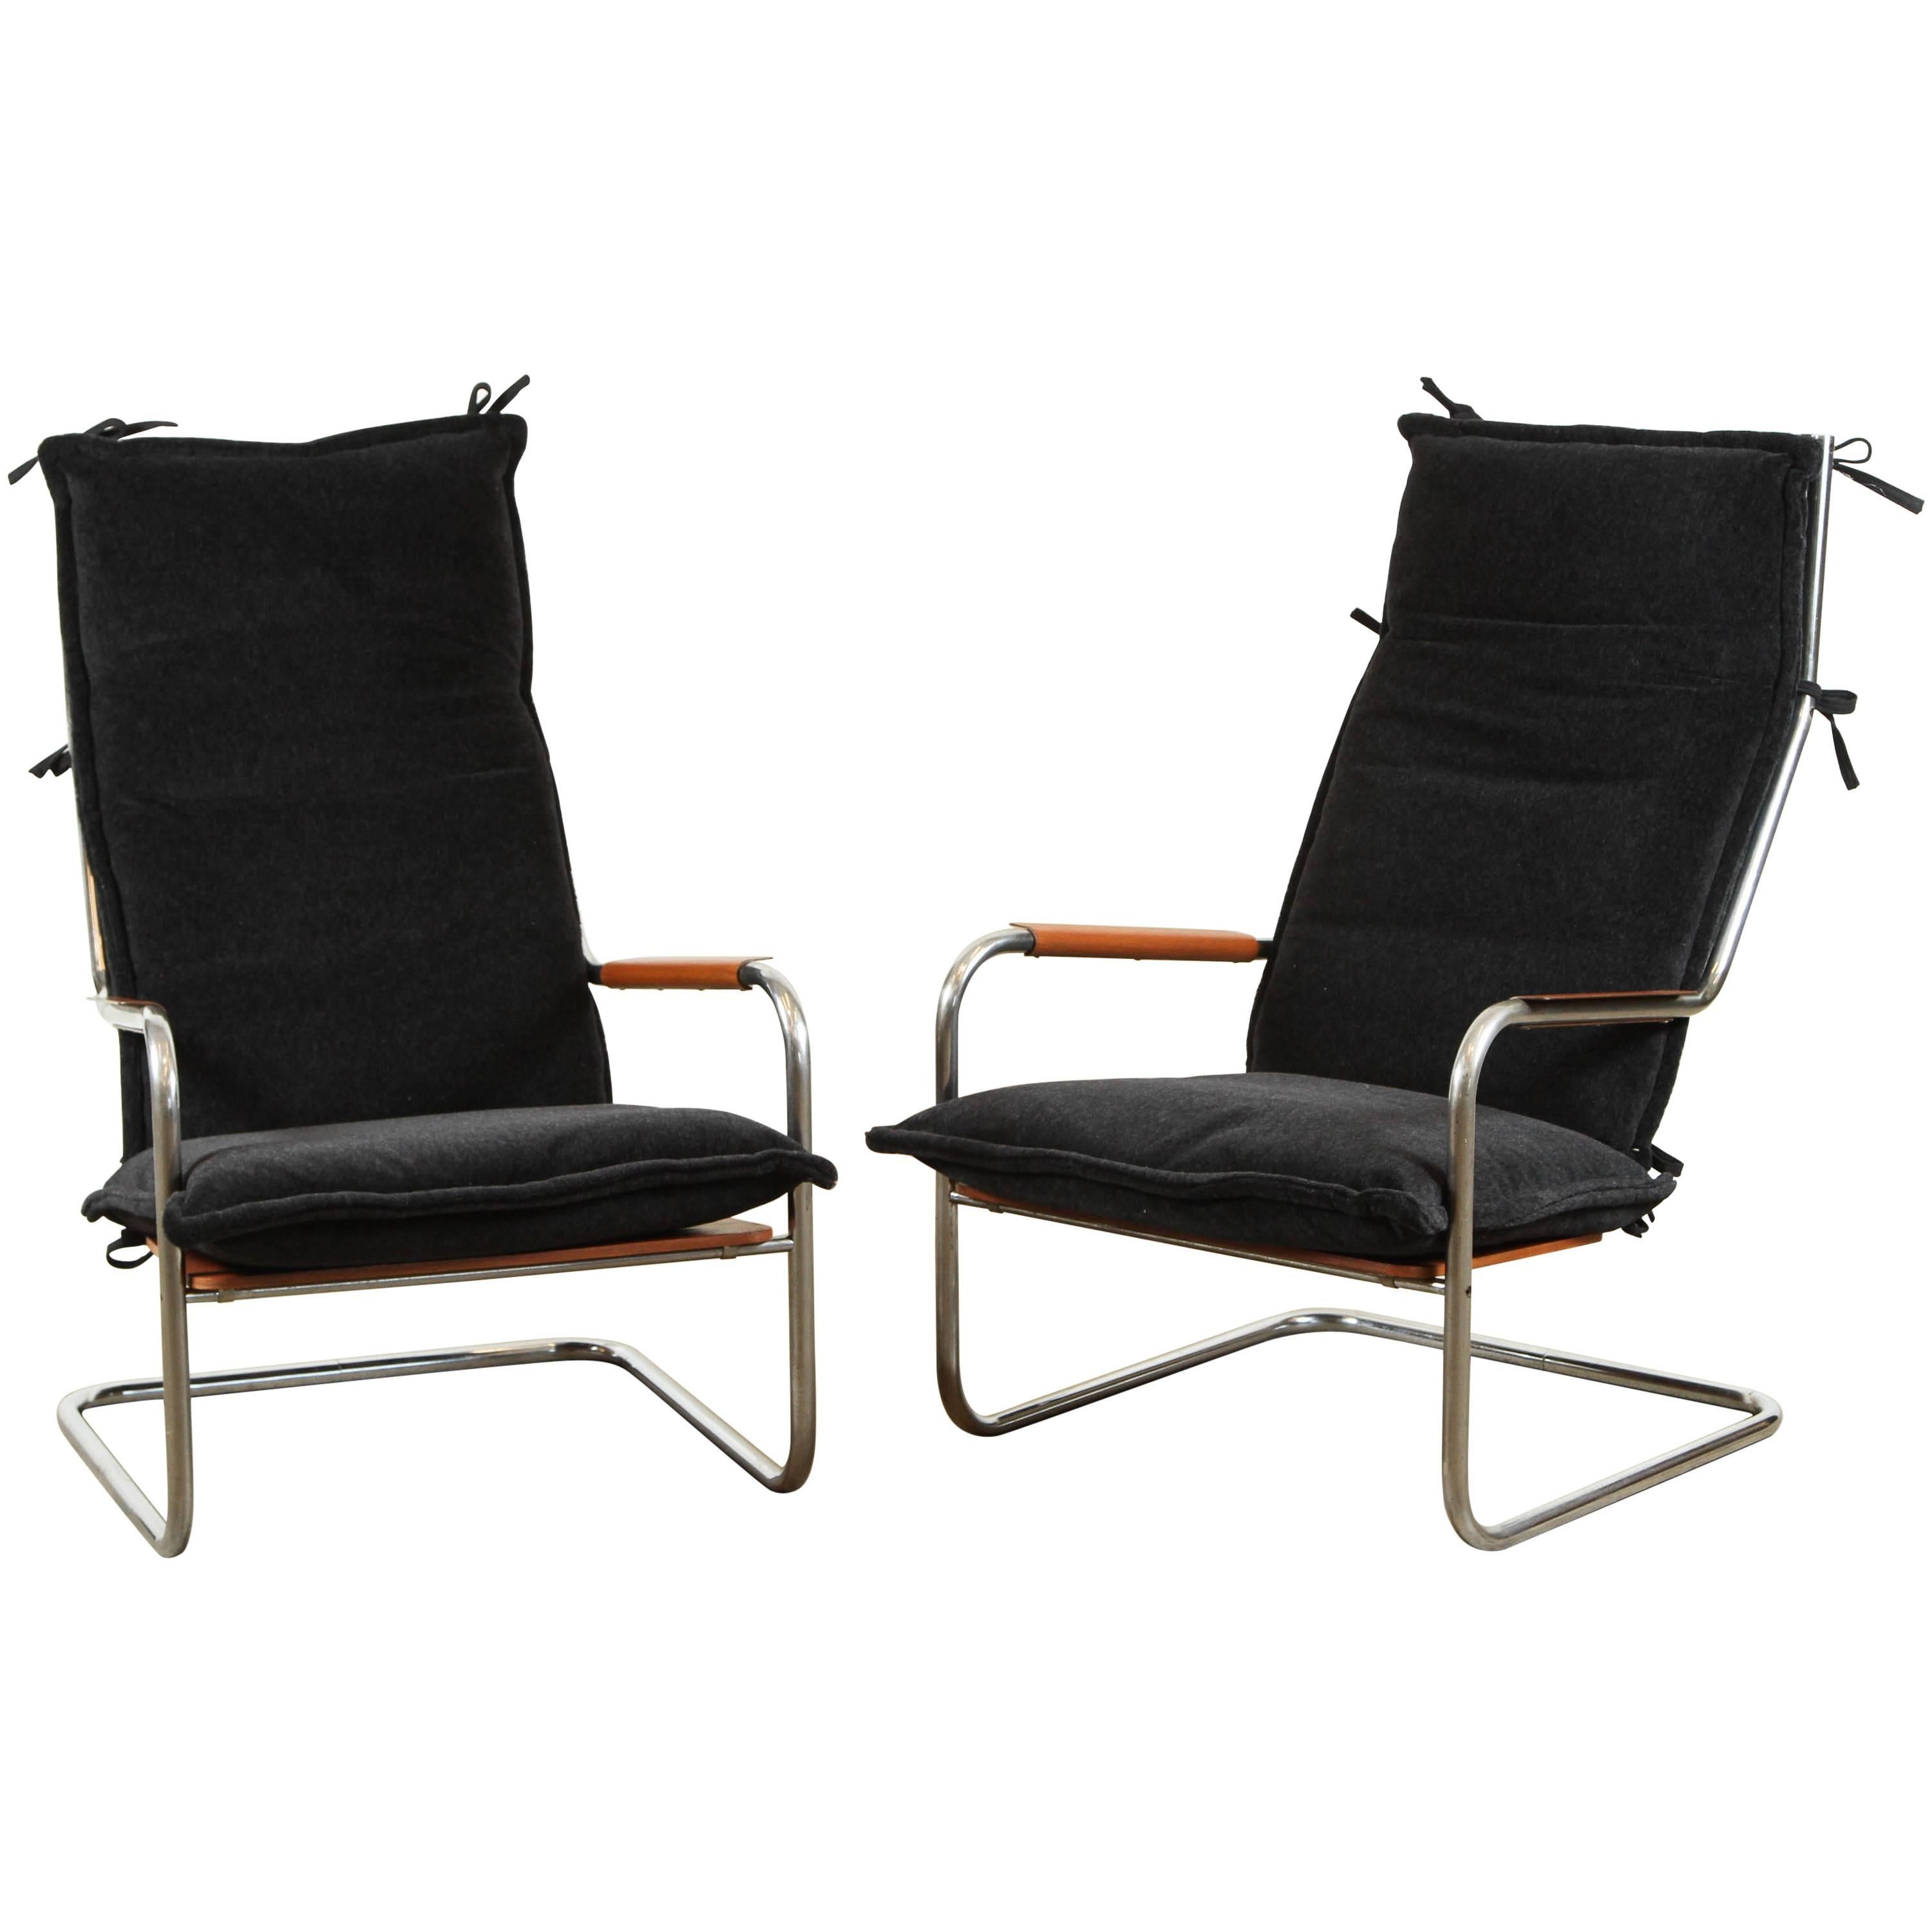 Pair of Alpaca and Chrome Lounge Chairs by Thonet